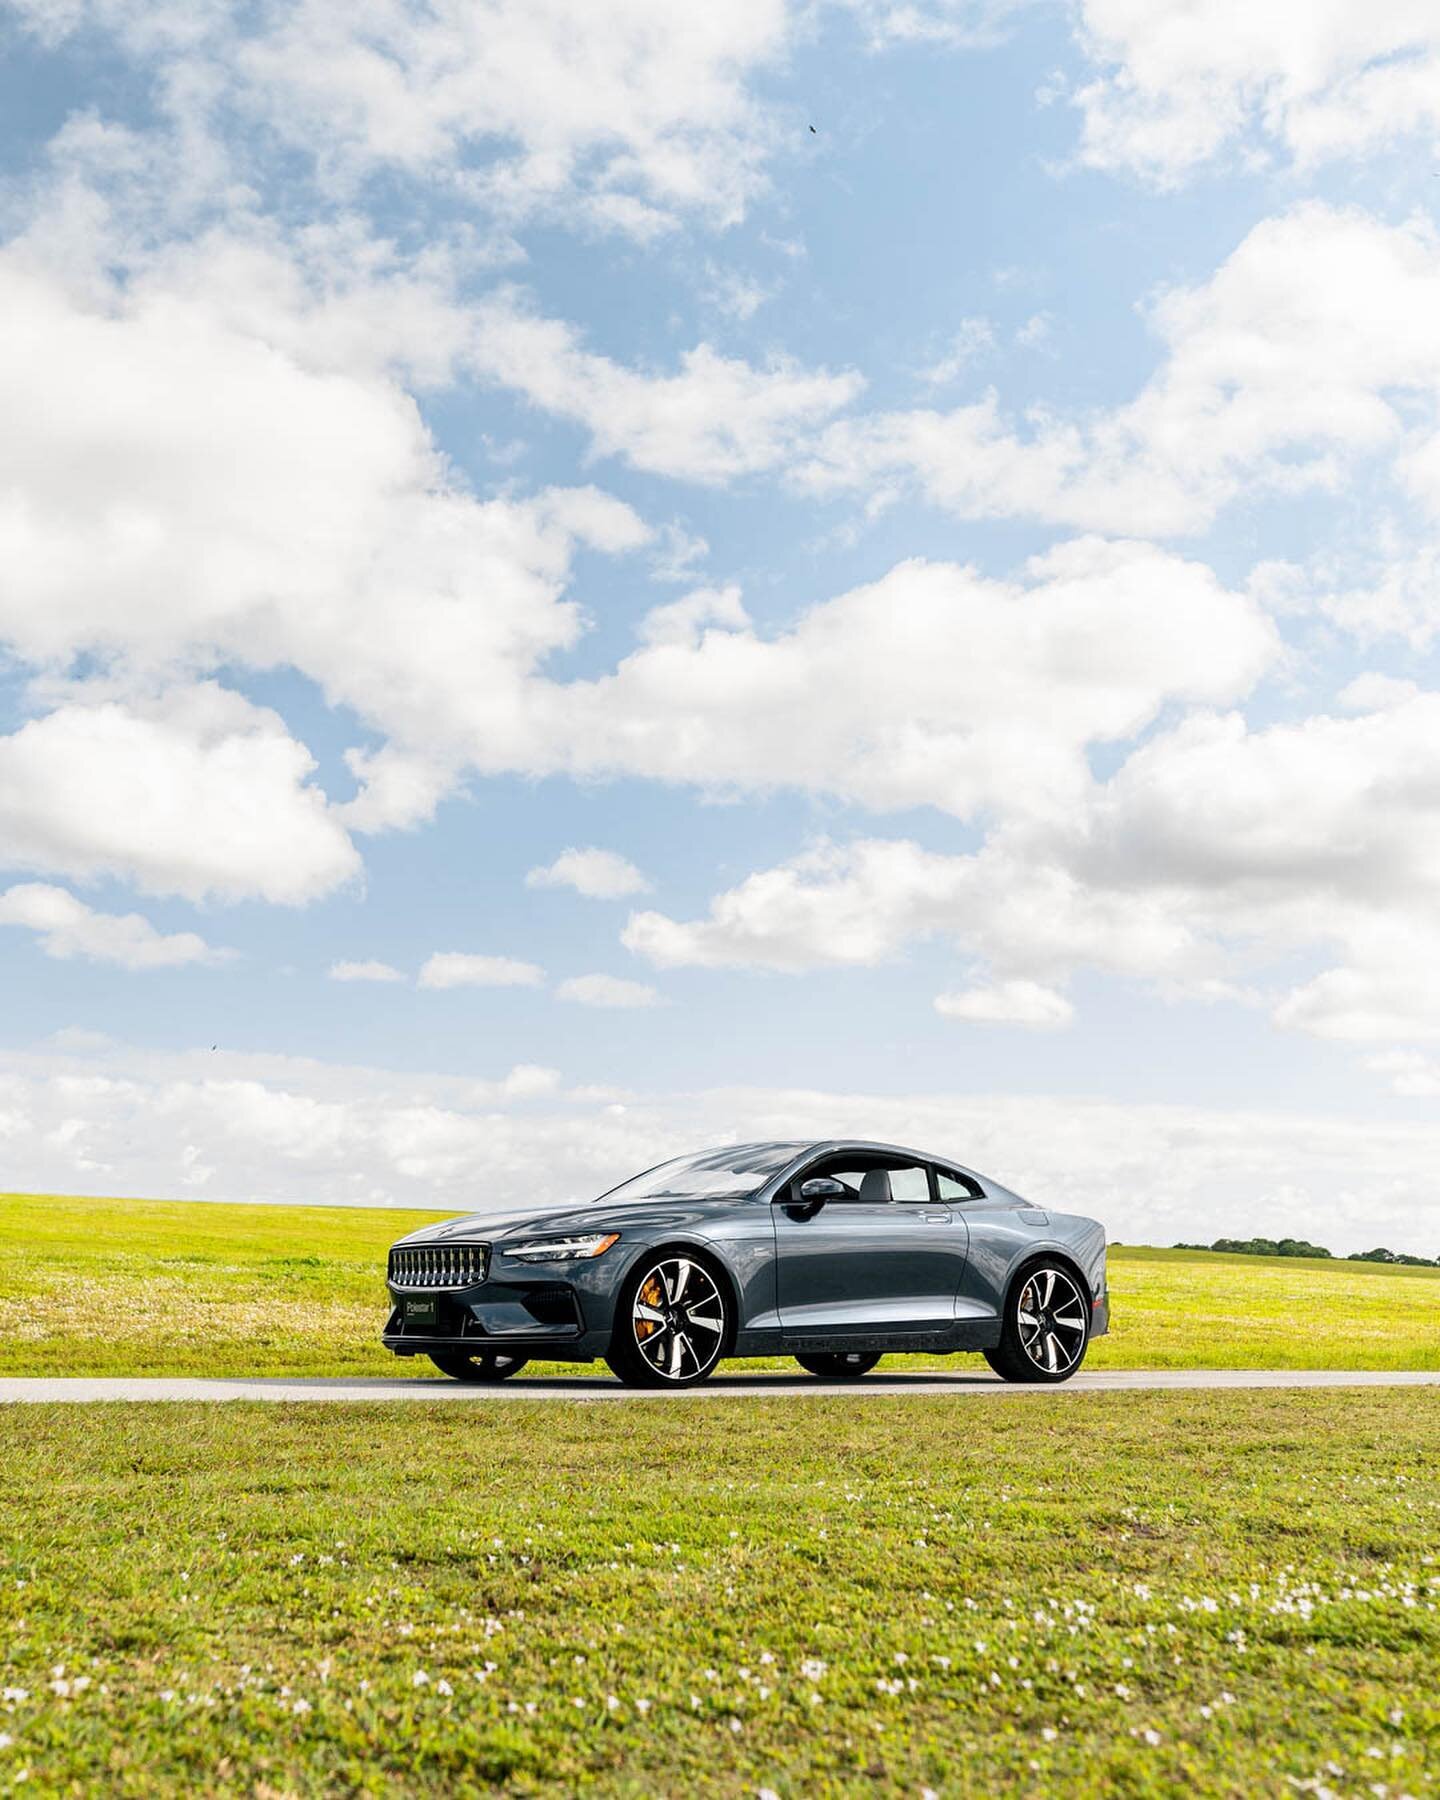 Starting off 2023 with a car in a field
&bull;
&bull;
&bull;
&bull;
&bull;
#polestar #polestar1 #supercar #blacklist #amazingcars247 #carswithoutlimits #carporn #like #follow #photography #hypercar #carphotography #luxurylifestyle #billionairesclub #